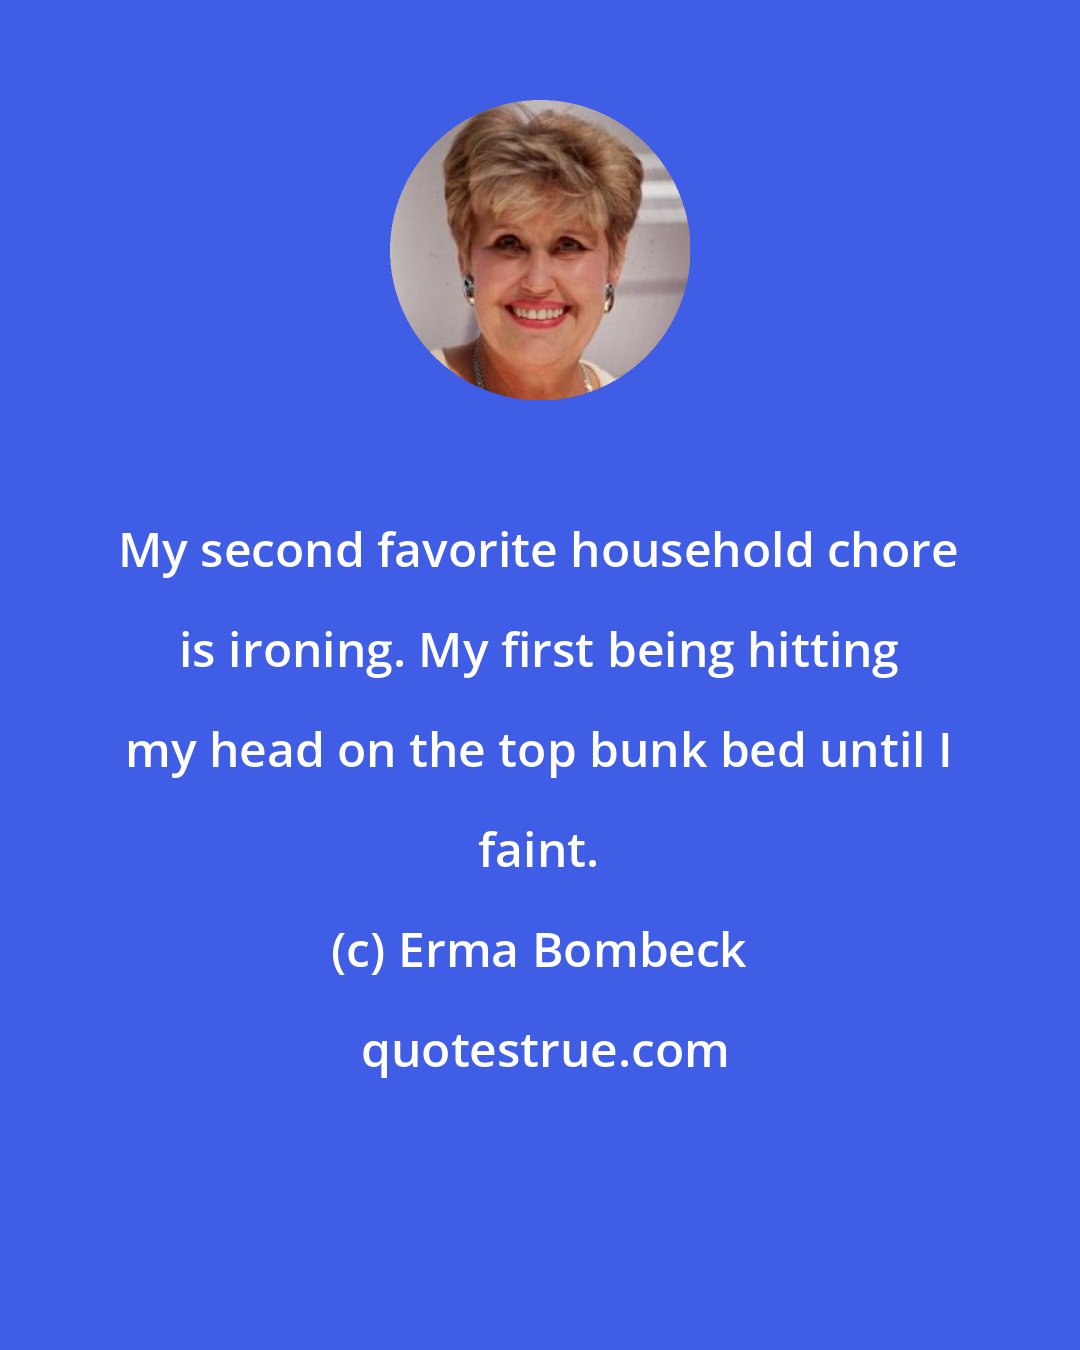 Erma Bombeck: My second favorite household chore is ironing. My first being hitting my head on the top bunk bed until I faint.